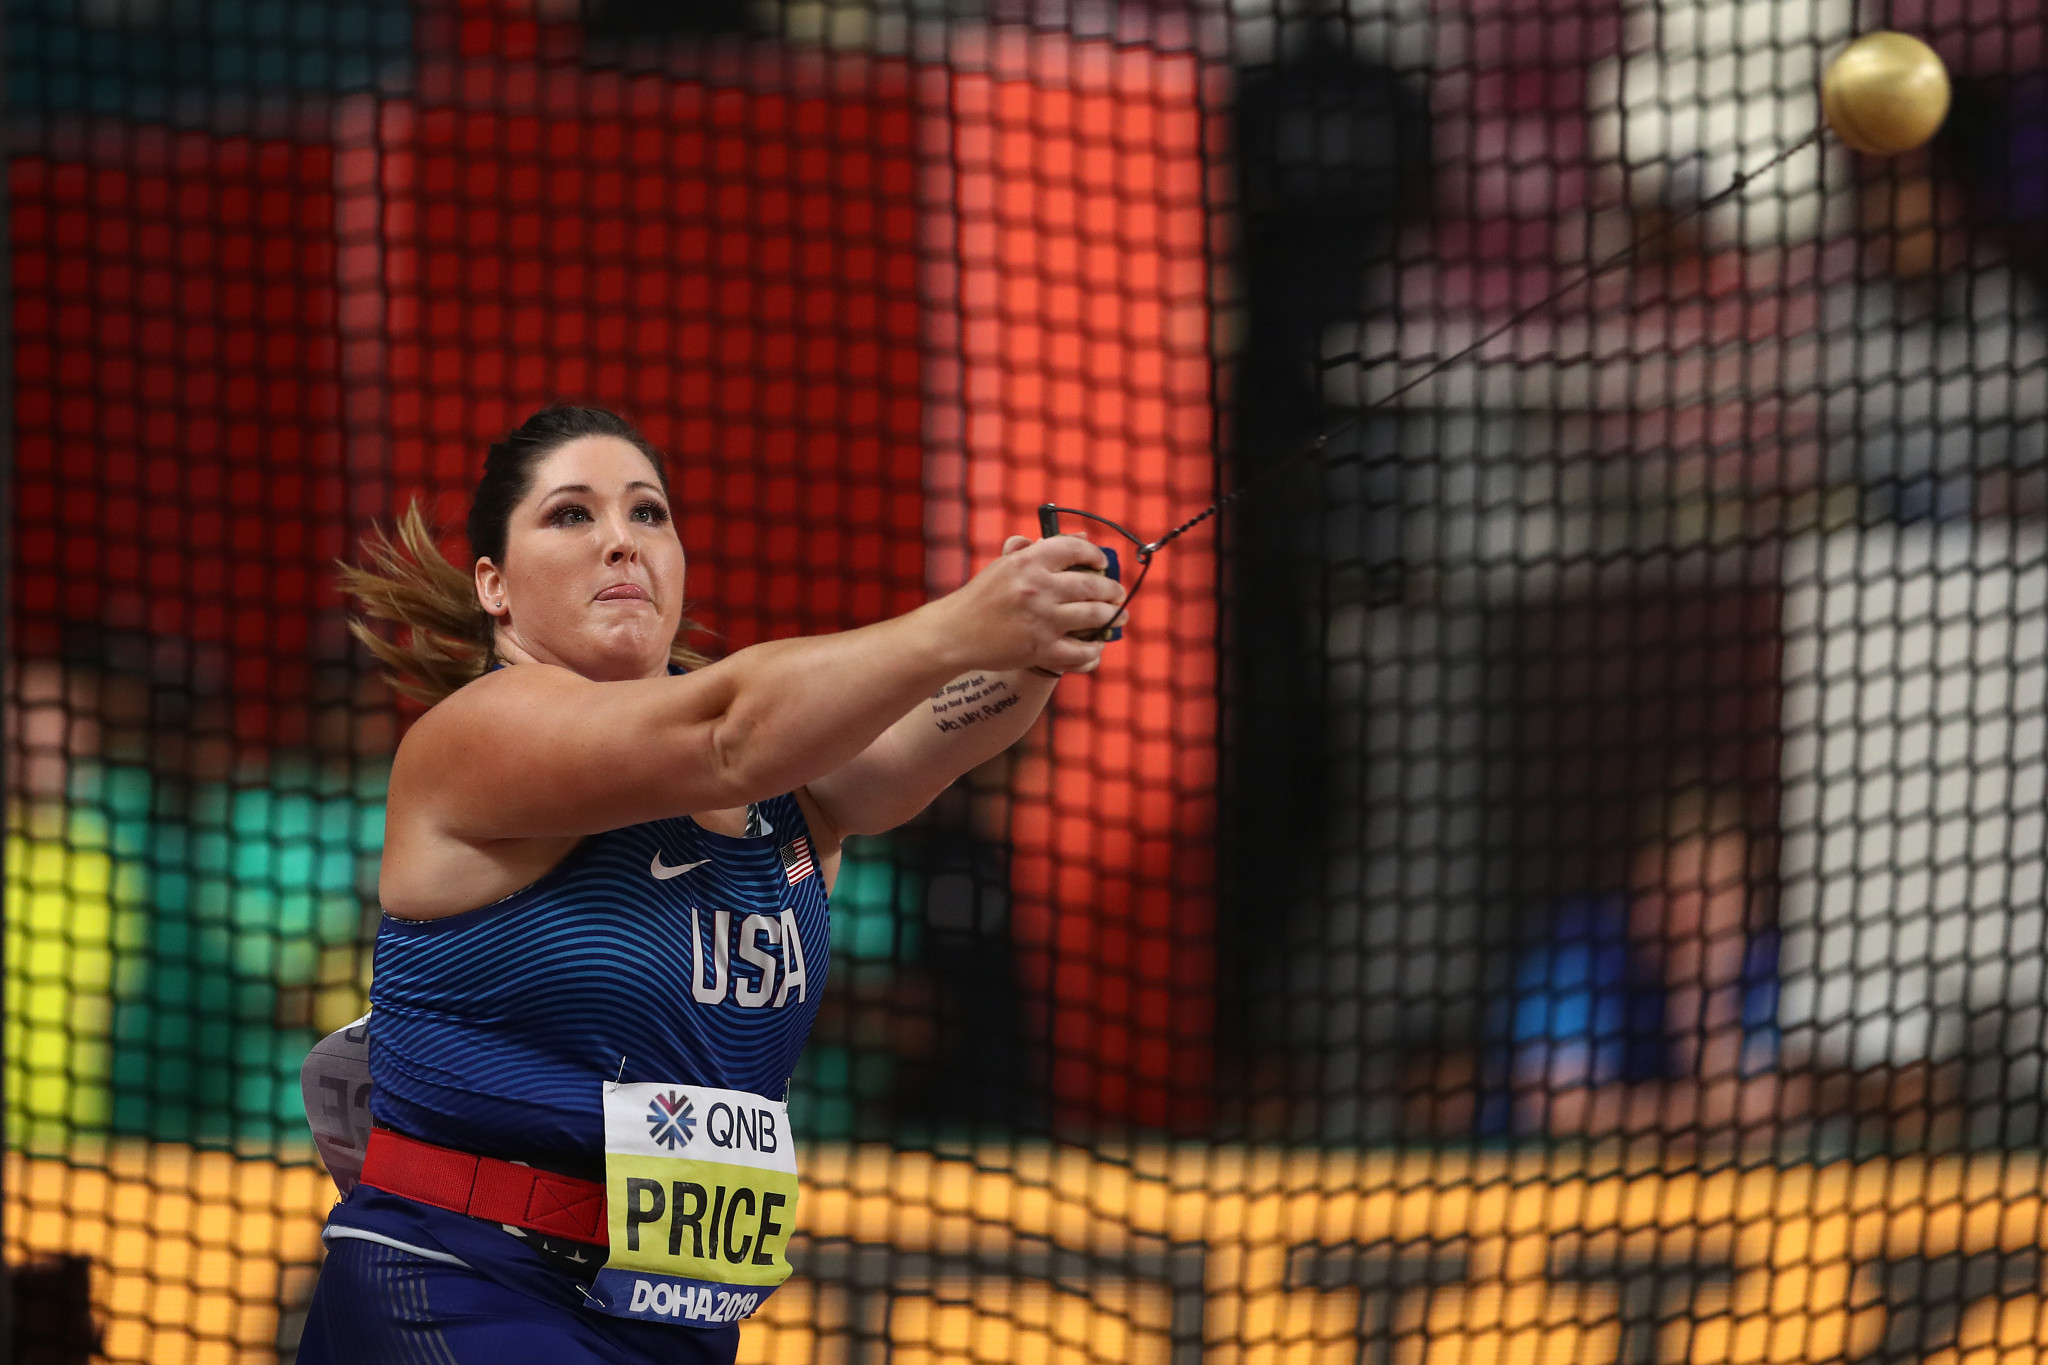 Hammer thrower DeAnna Price is among the female contenders for the United States Olympic and Paralympic Committee Team USA Awards for September after her victory at the IAAF World Championships ©Getty Images